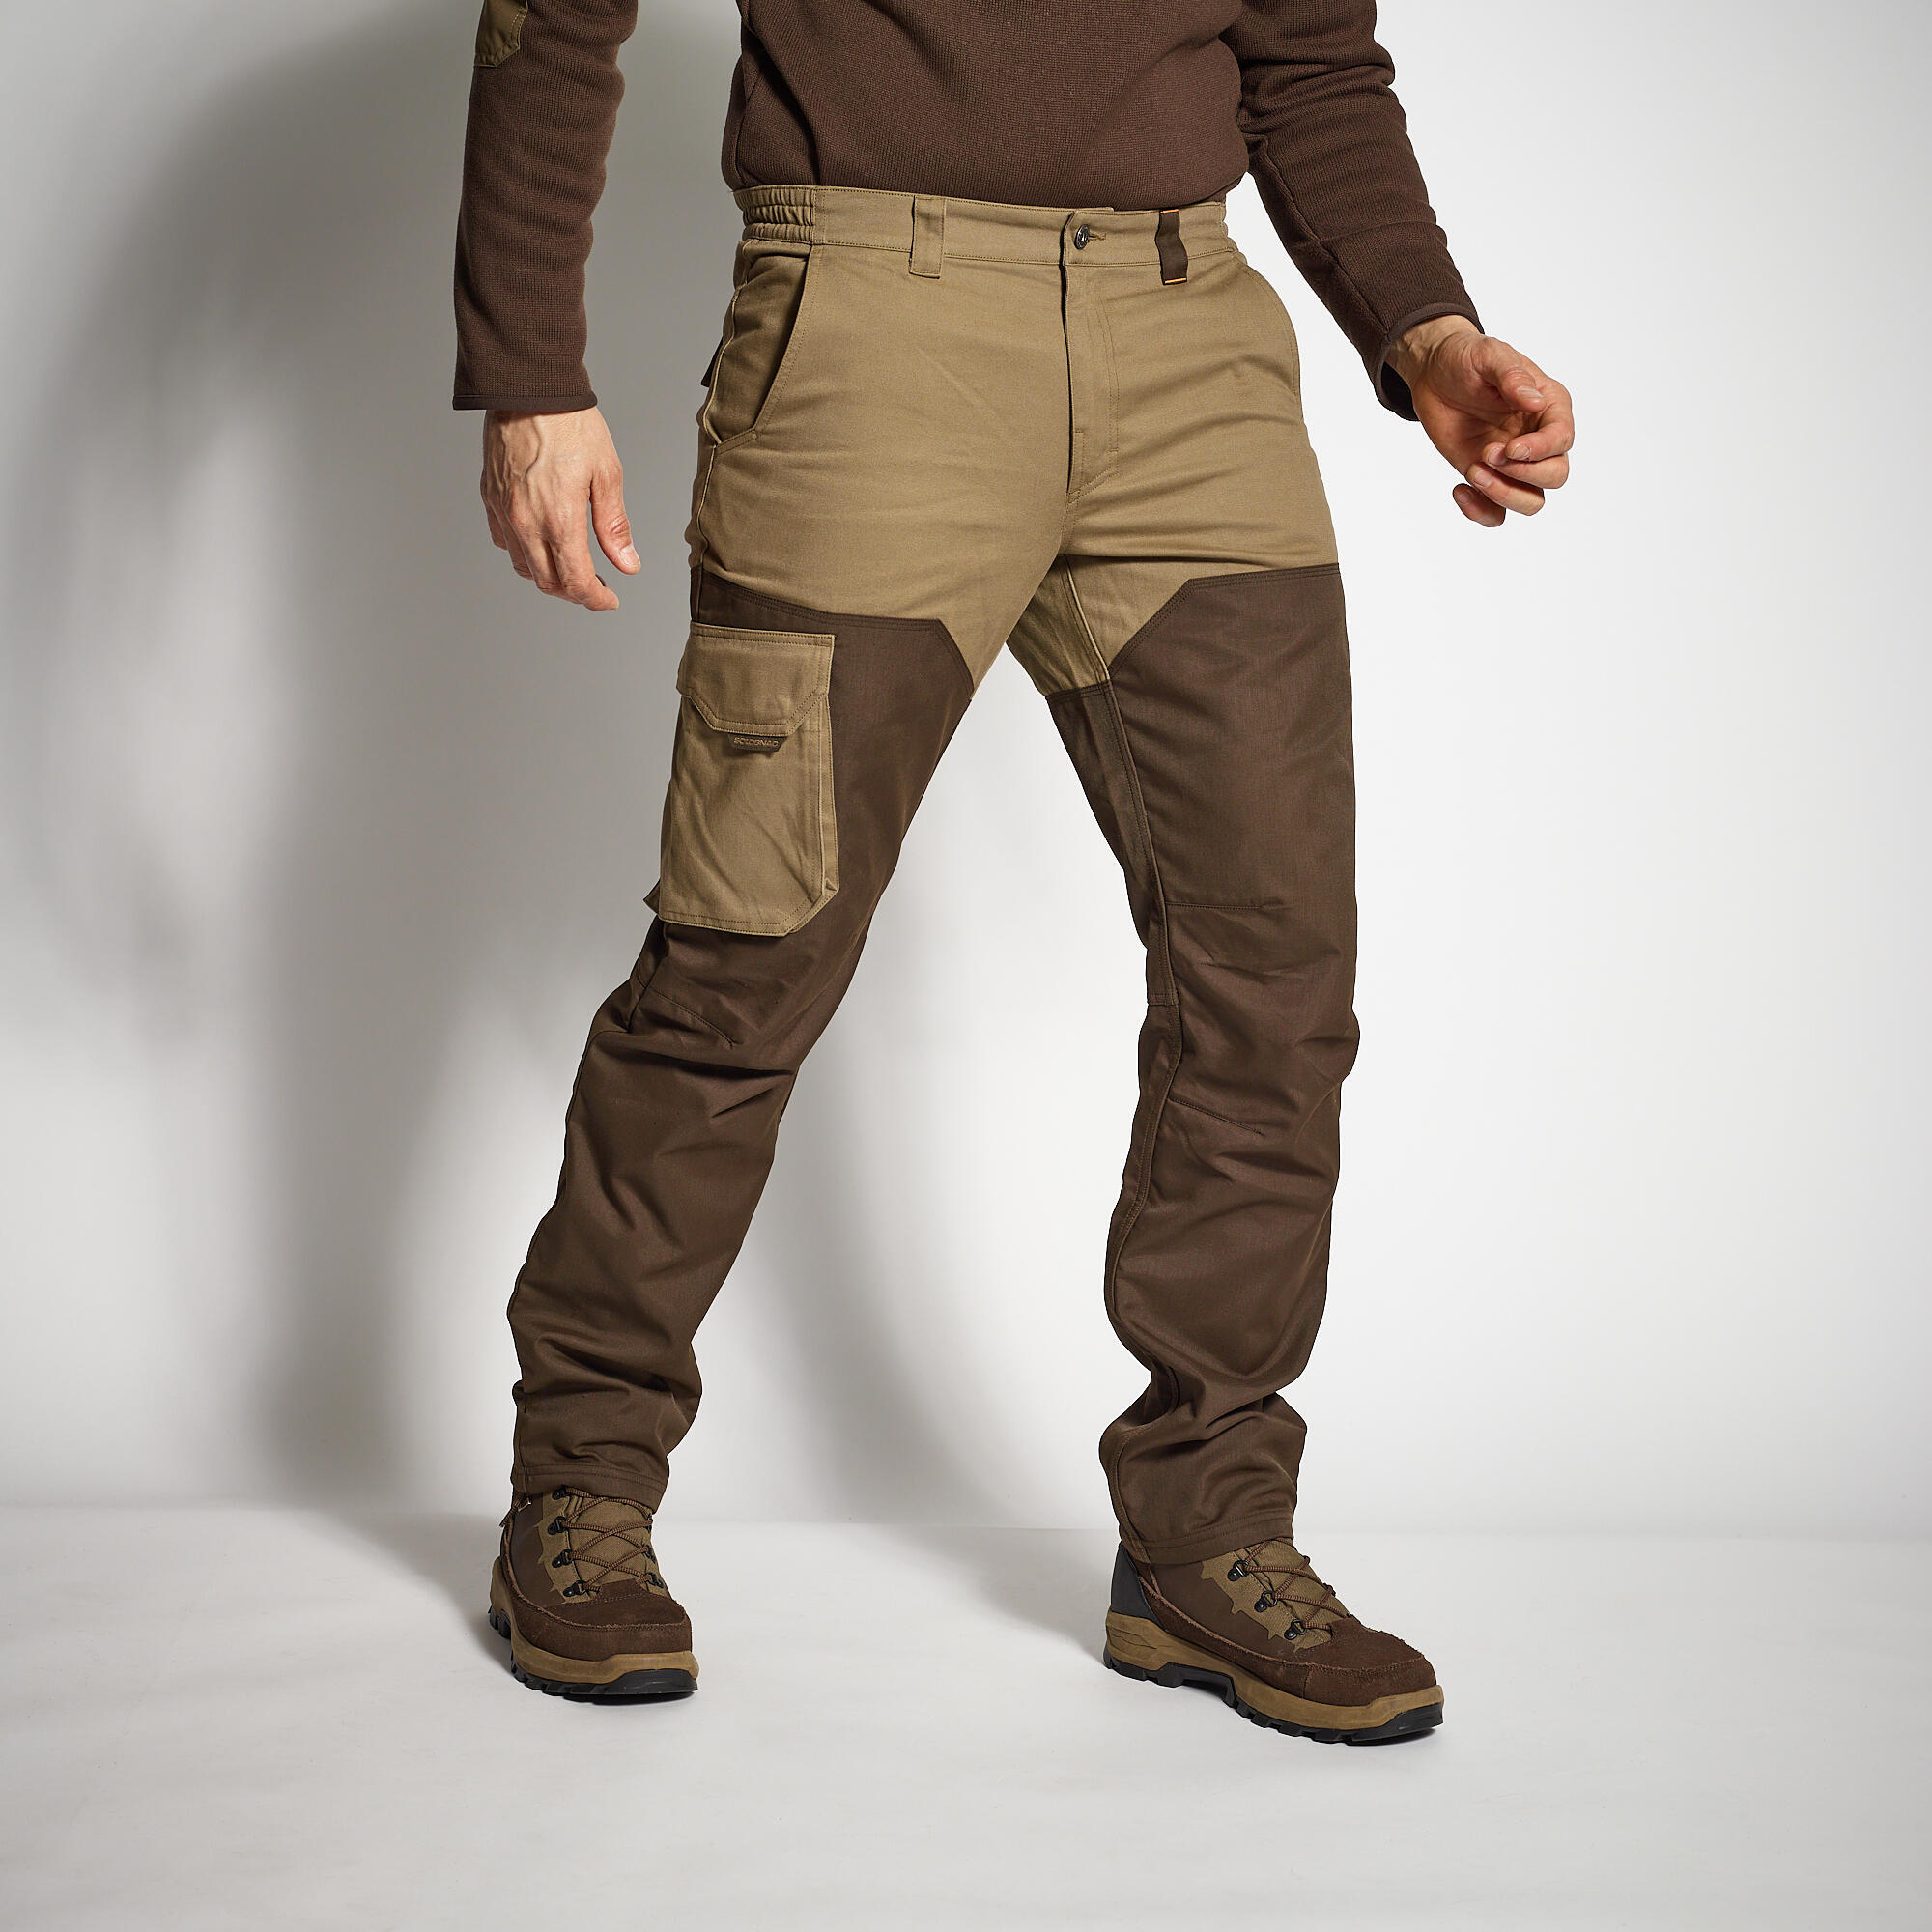 SOLOGNAC Reinforced Dry Weather Trousers - Brown